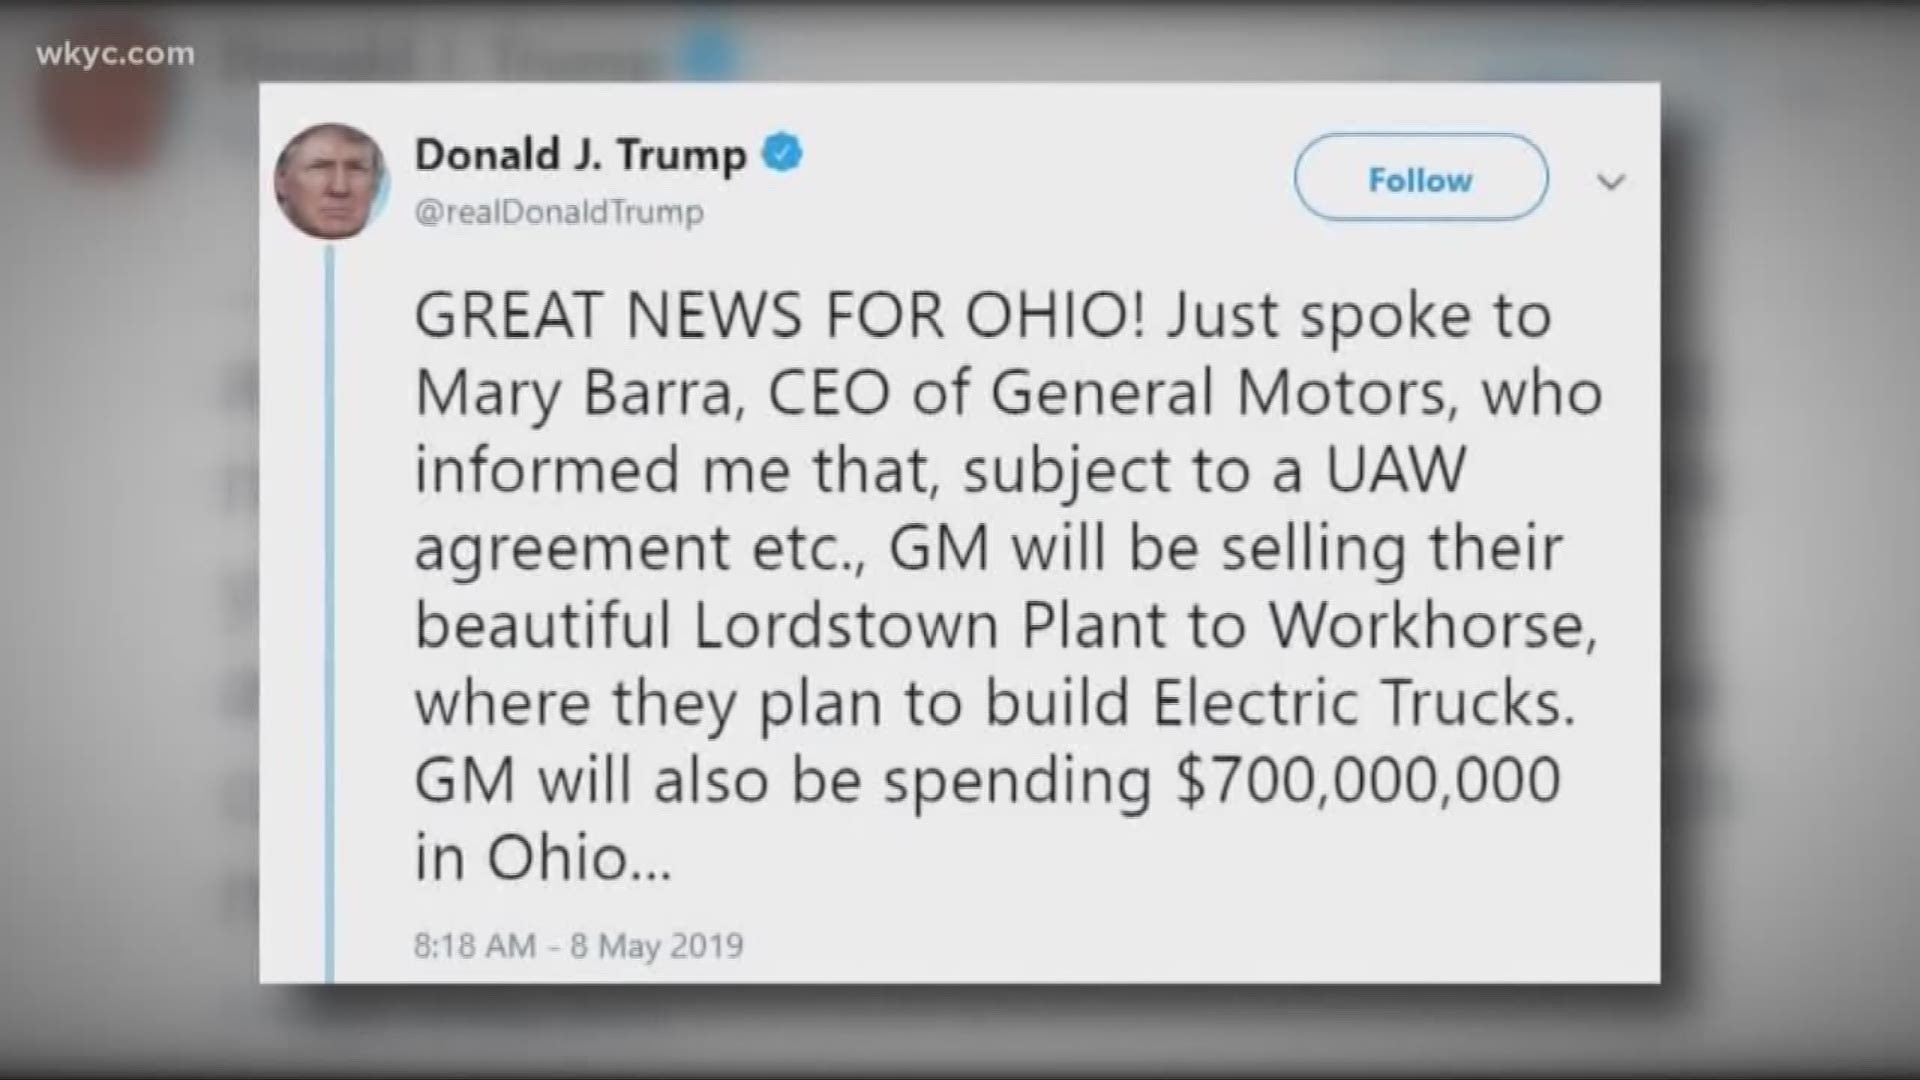 General Motors confirms it is 'in discussions' to sell dormant Lordstown plant to electric truck manufacturer